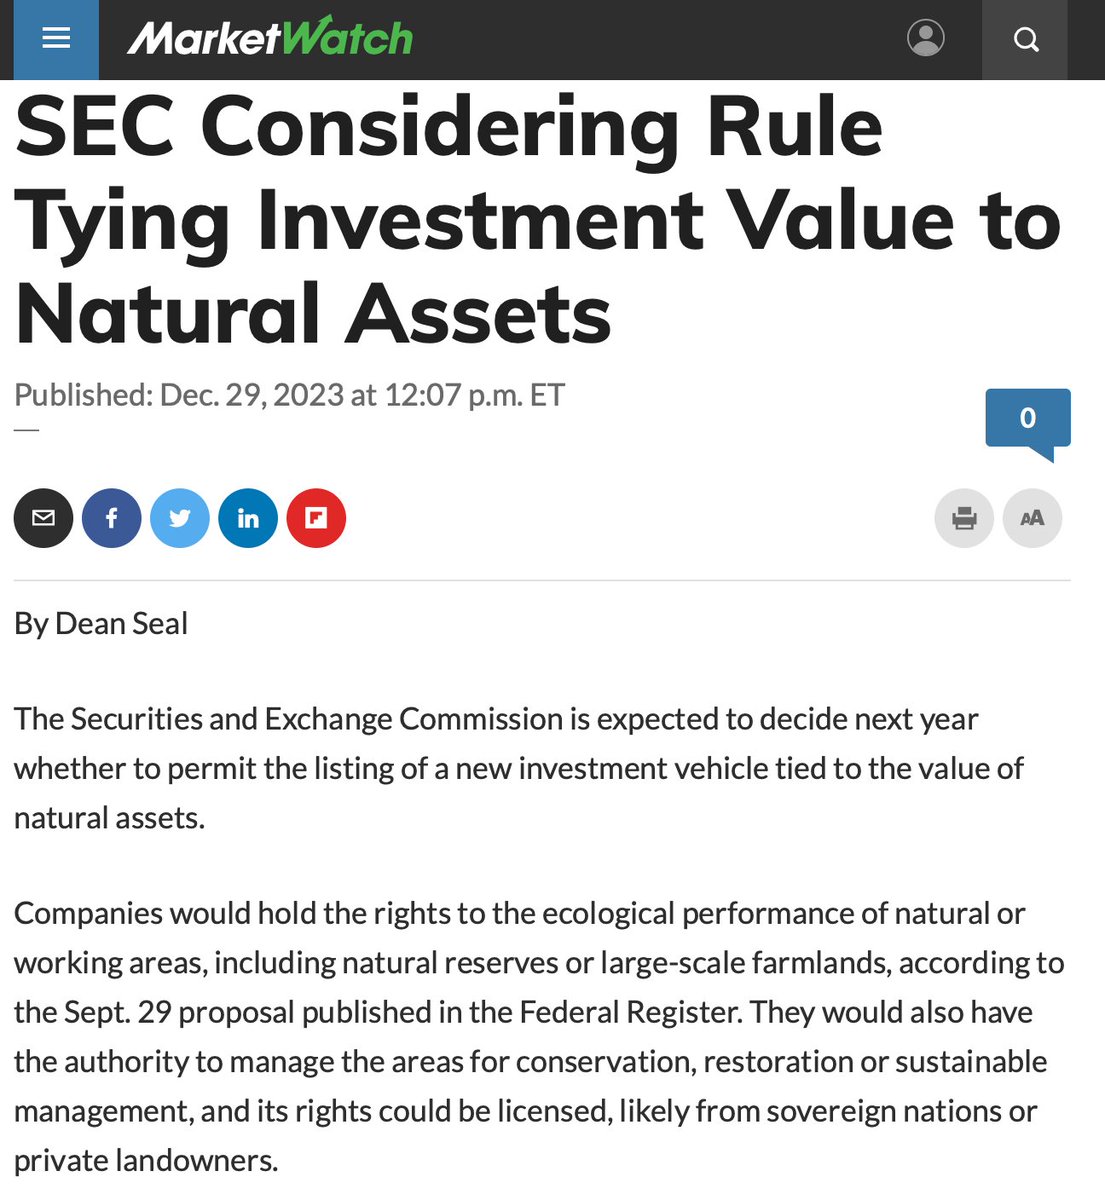 This was groundwork for 'Natural Asset Companies,' which are a codification of Degrowth Communism into the American and international 'capital' market. This needs to be destroyed.